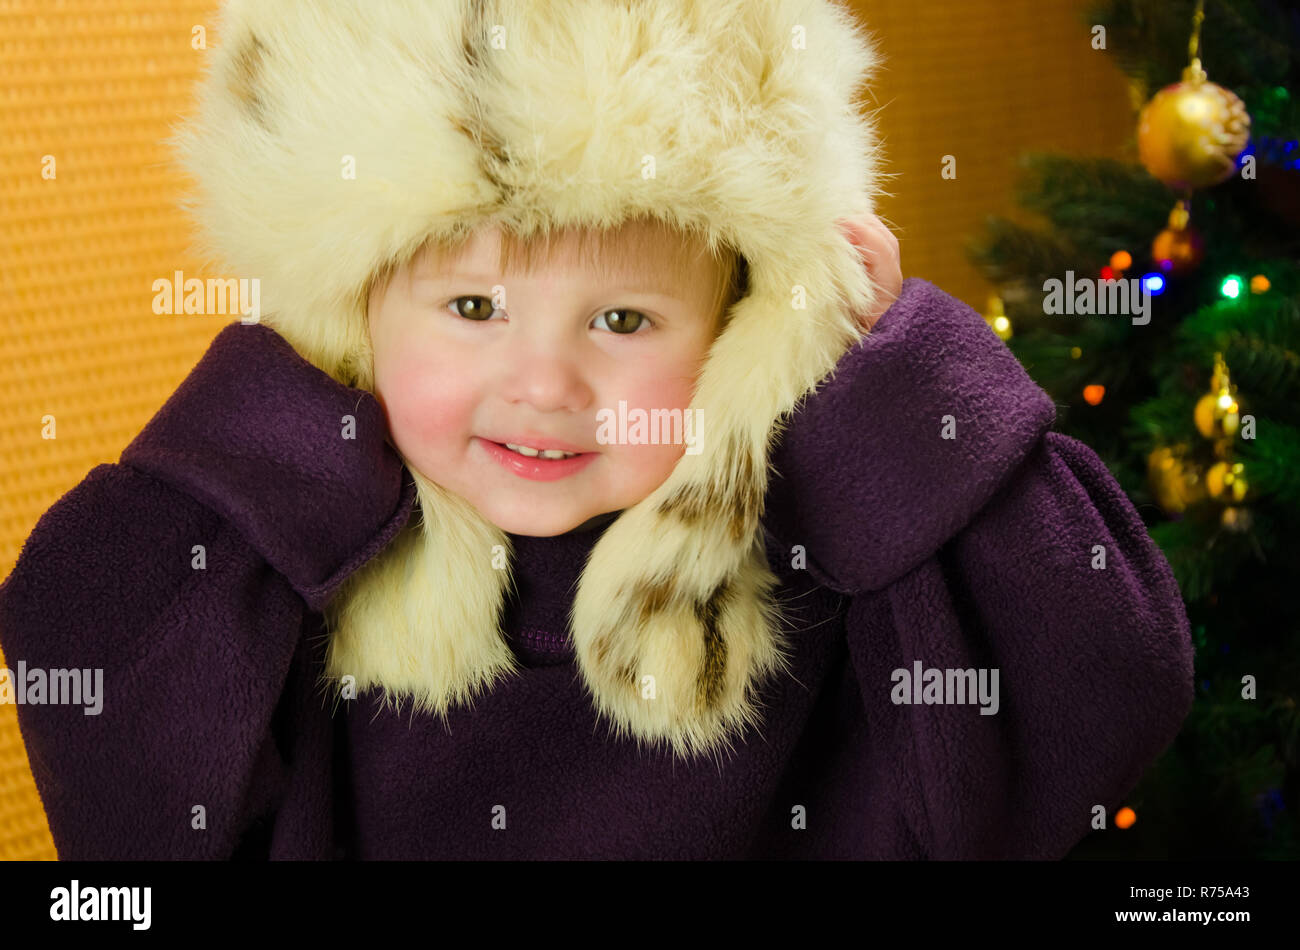 Portrait of two years old pretty little girl in white, russian, fur hat near a Christmas tree Stock Photo